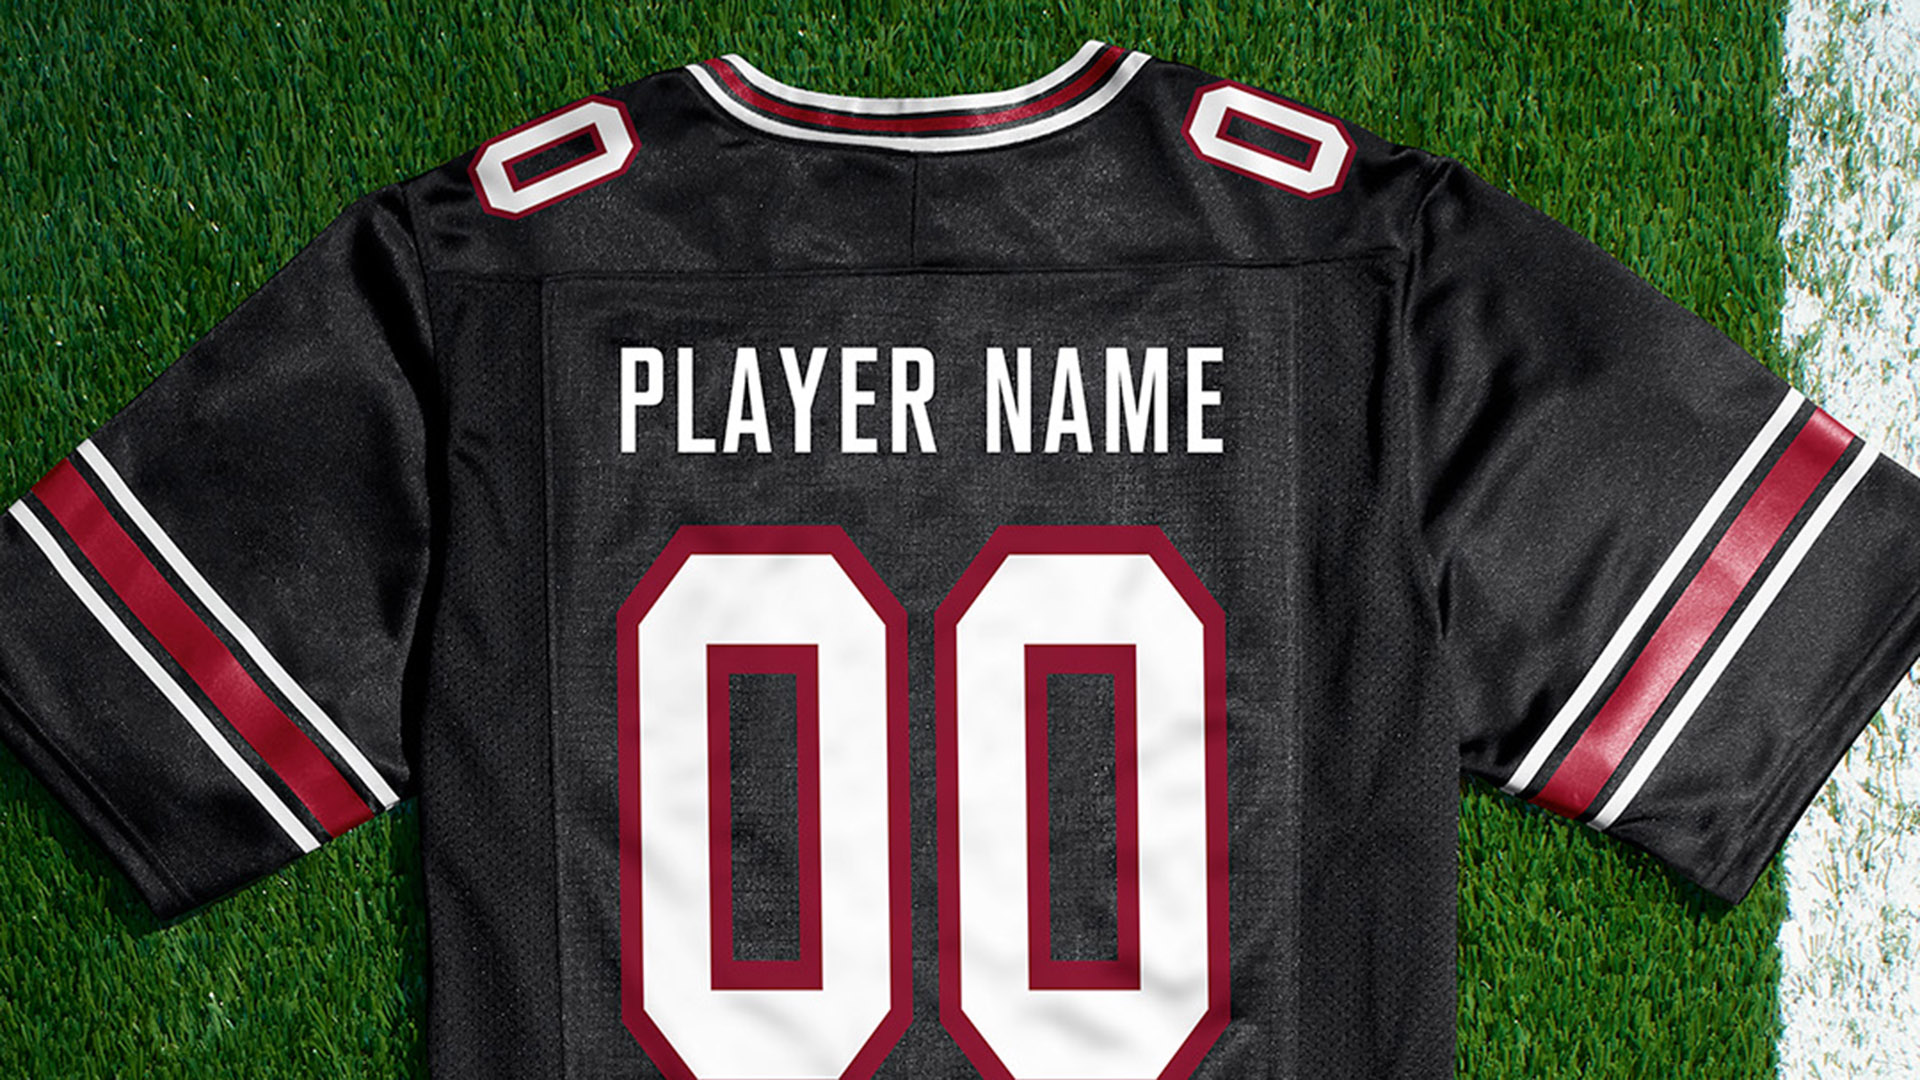 Gamecock Football Custom Player Jerseys Now Available